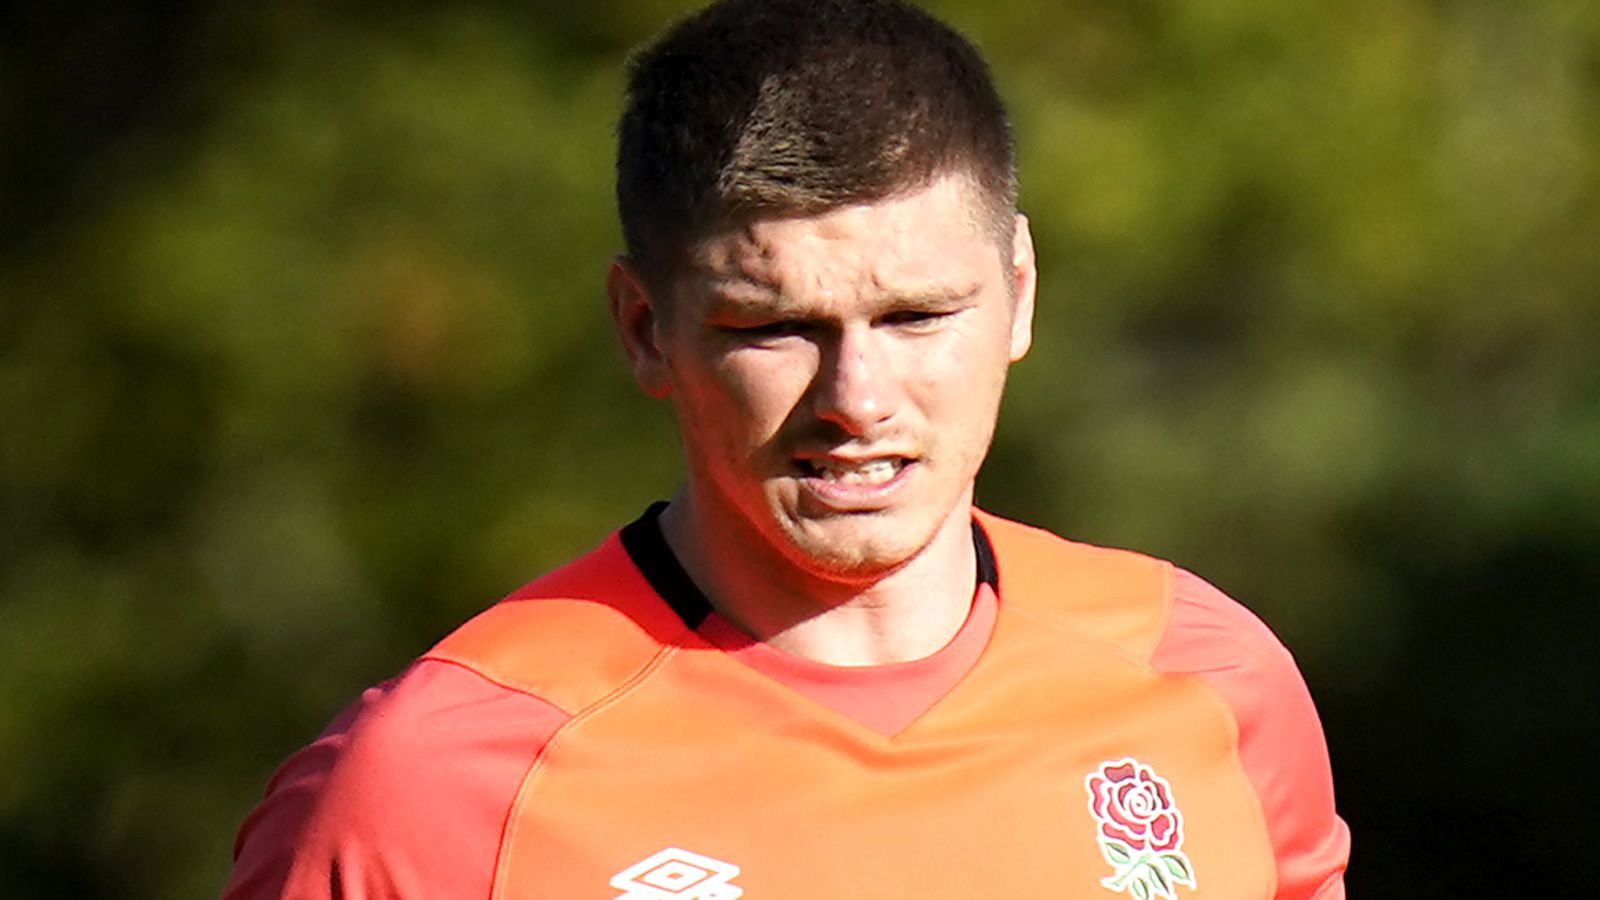 Owen Farrell: England captain tests positive for Covid-19 ahead of Tonga match in Autumn Nations Series